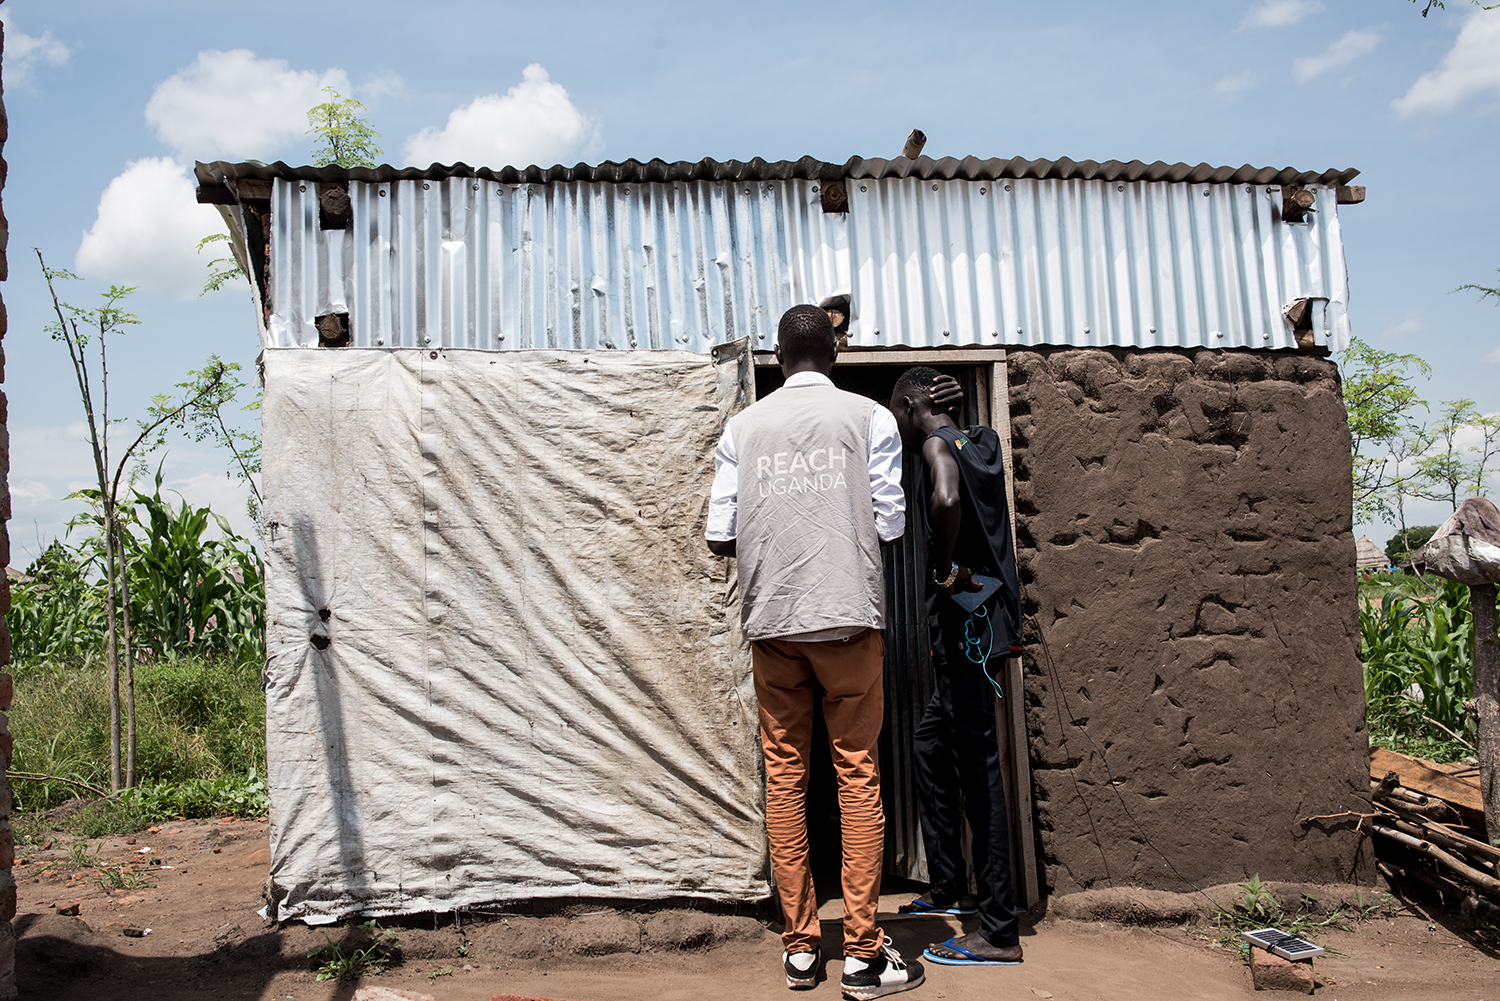 REACH staff gather data on the needs and services of refugees living in Uganda. (© Christian Jepsen 2018)